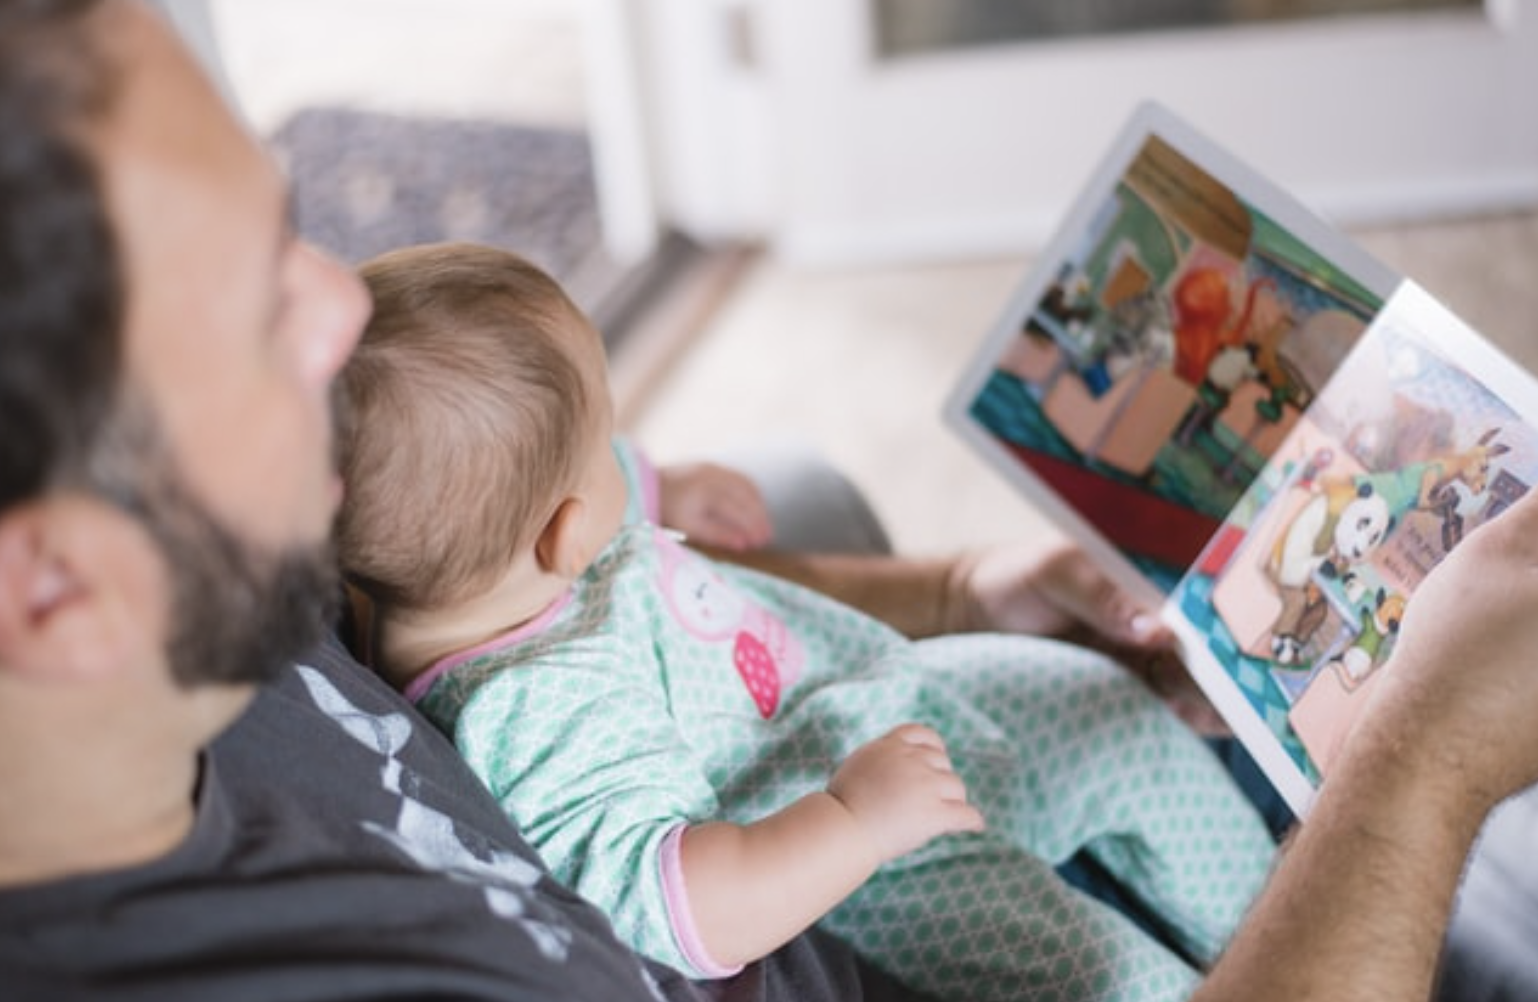 EMCOR UK Launches Parental Leave Policy